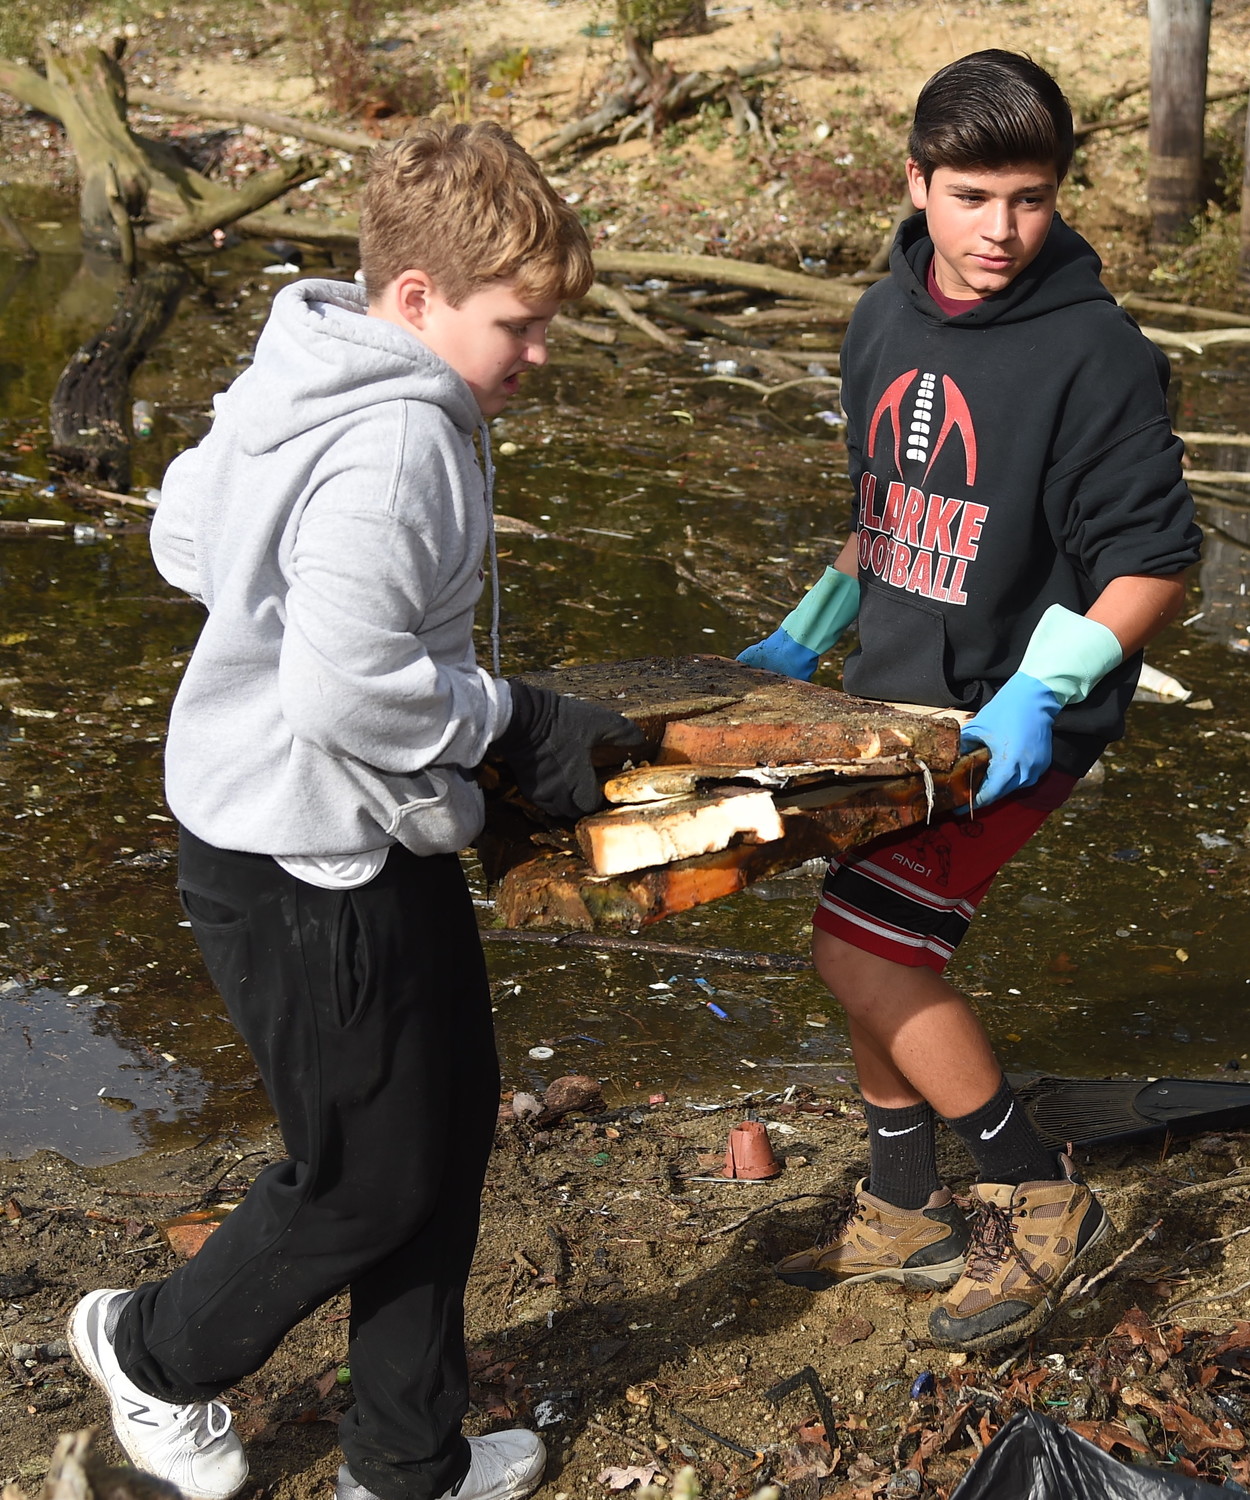 Robert Richard, 13, above, and Matt Anest, 14, carried large plastic disks that were decaying into the soil.